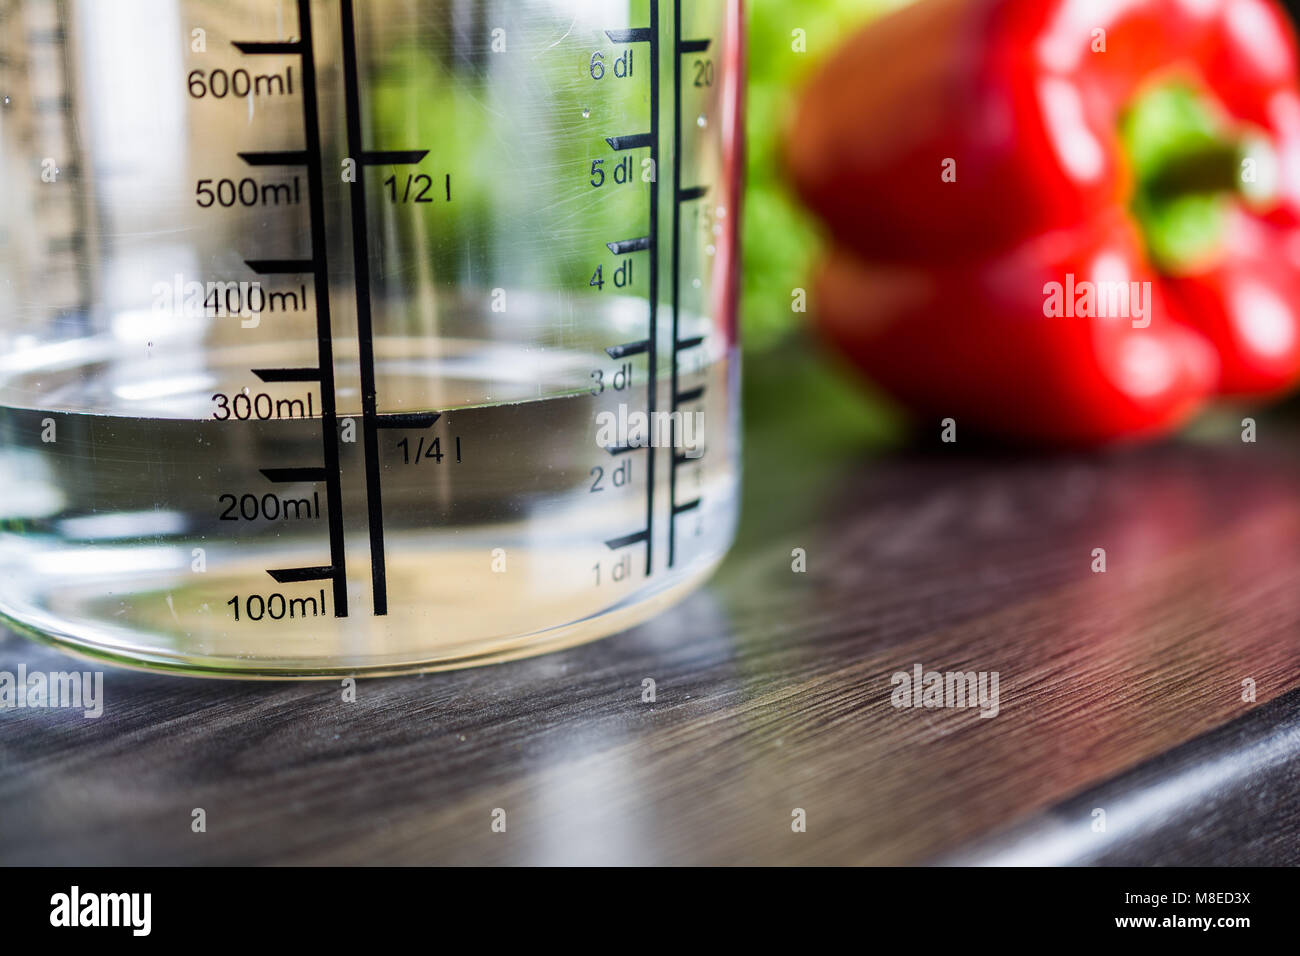 250ccm / 1/4 Liter / 250ml Of Water In A Measuring Cup On A Kitchen Counter  With Food Stock Photo - Alamy